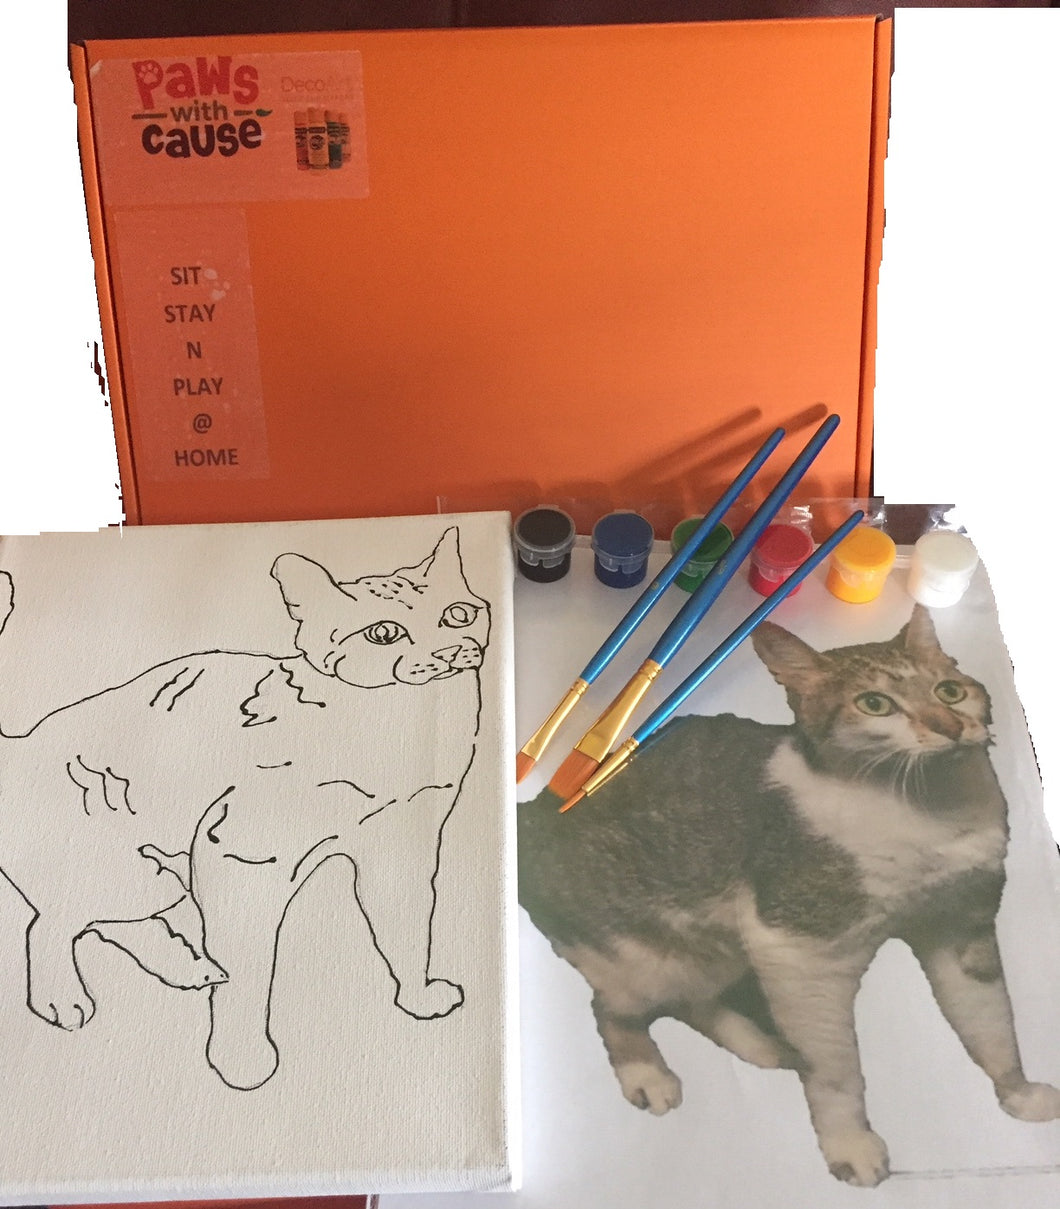 Sit-Stay-'n'-Play@Home  - Cat - Painting Kit